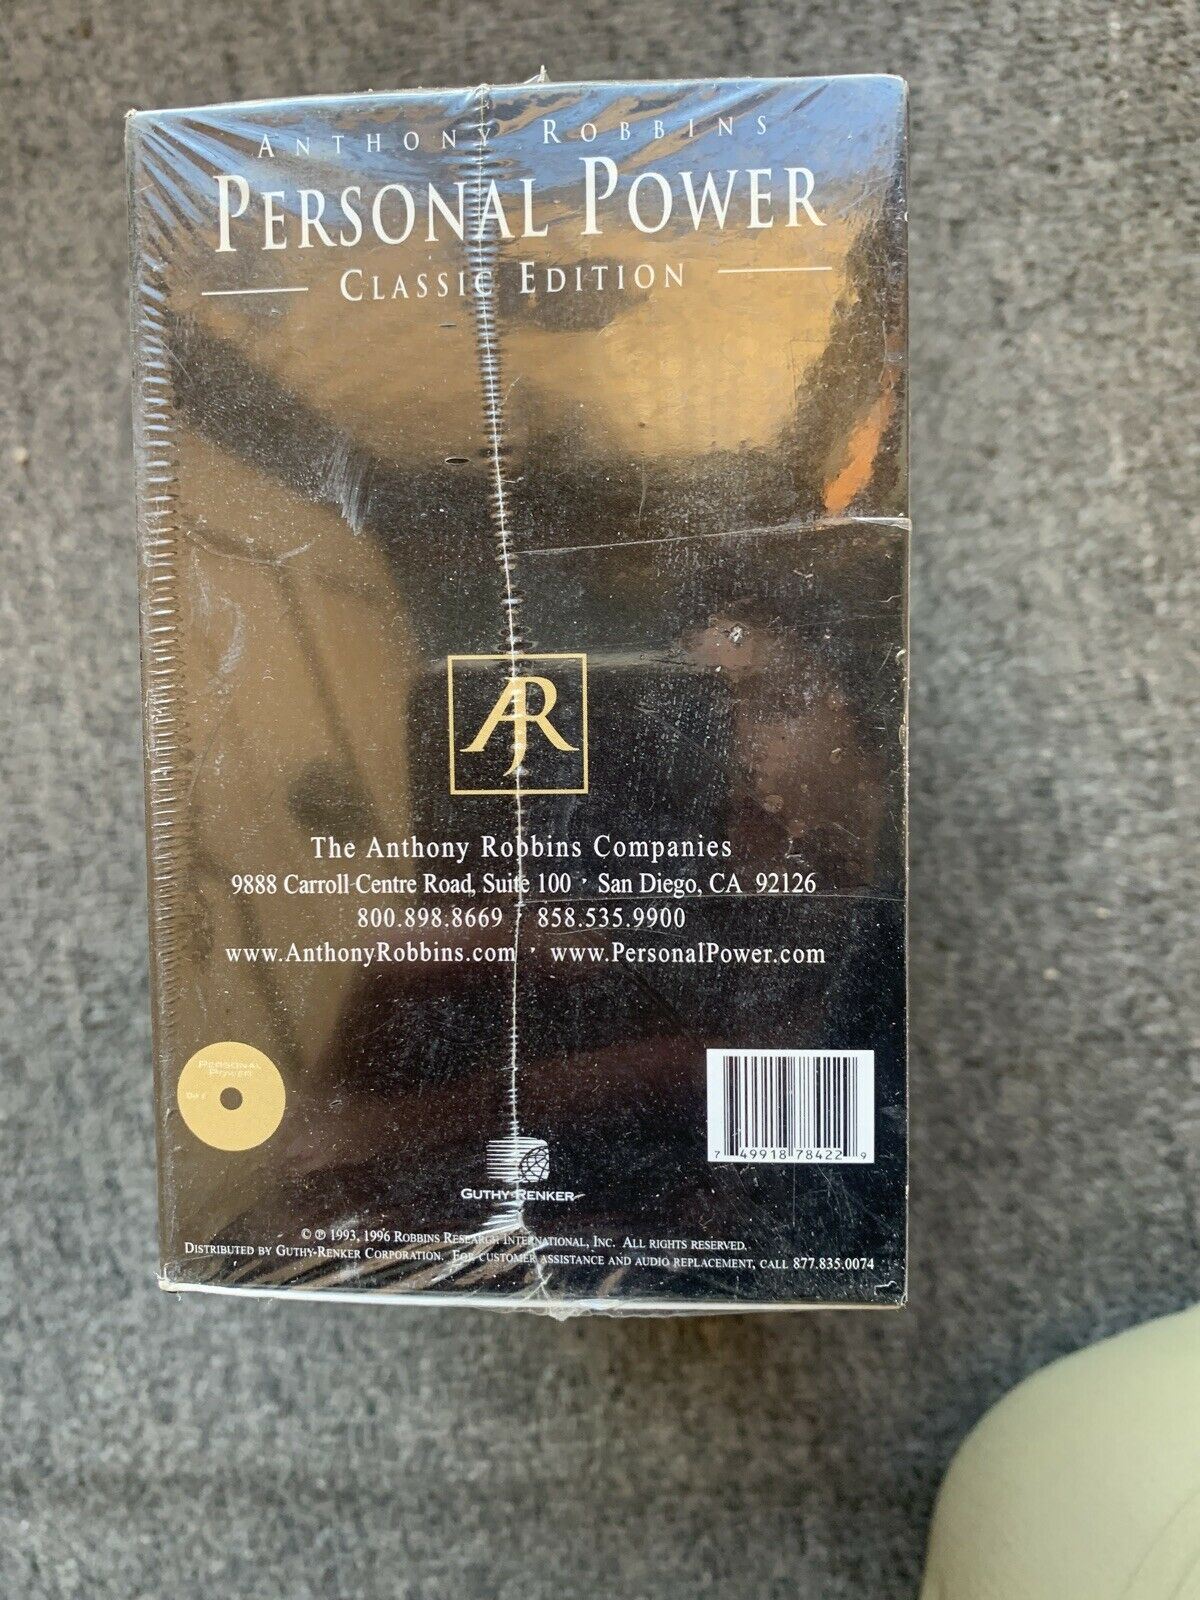 *New Sealed* Anthony Robbins - Personal Power - Classic Edition (Audio CD, 1996)